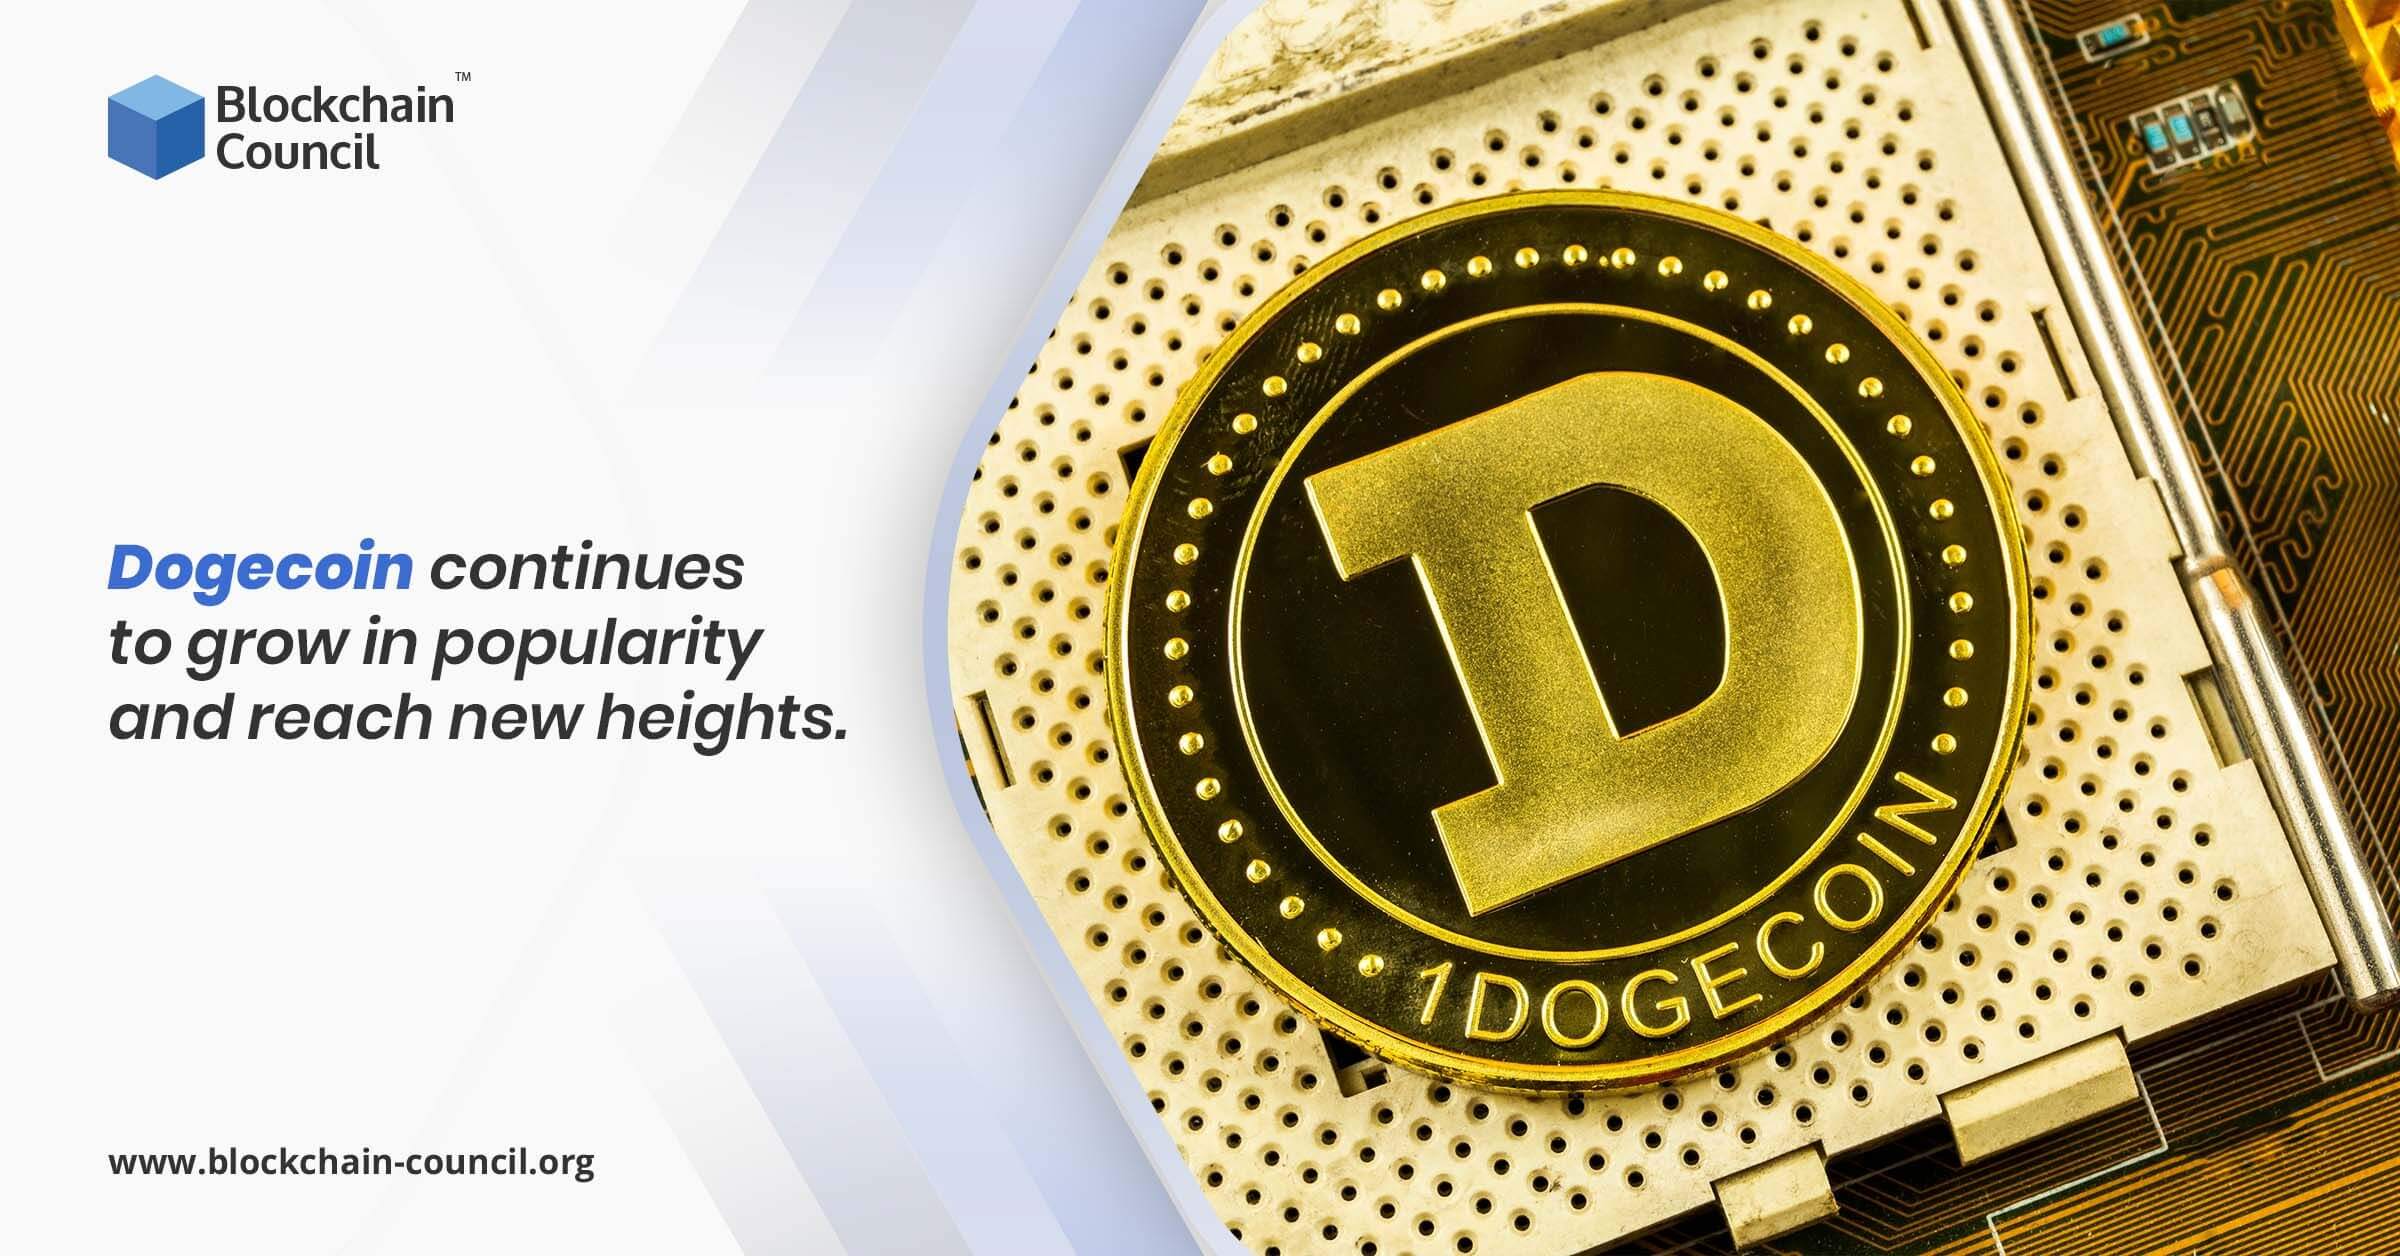 Dogecoin continues to grow in popularity and reach new heights.